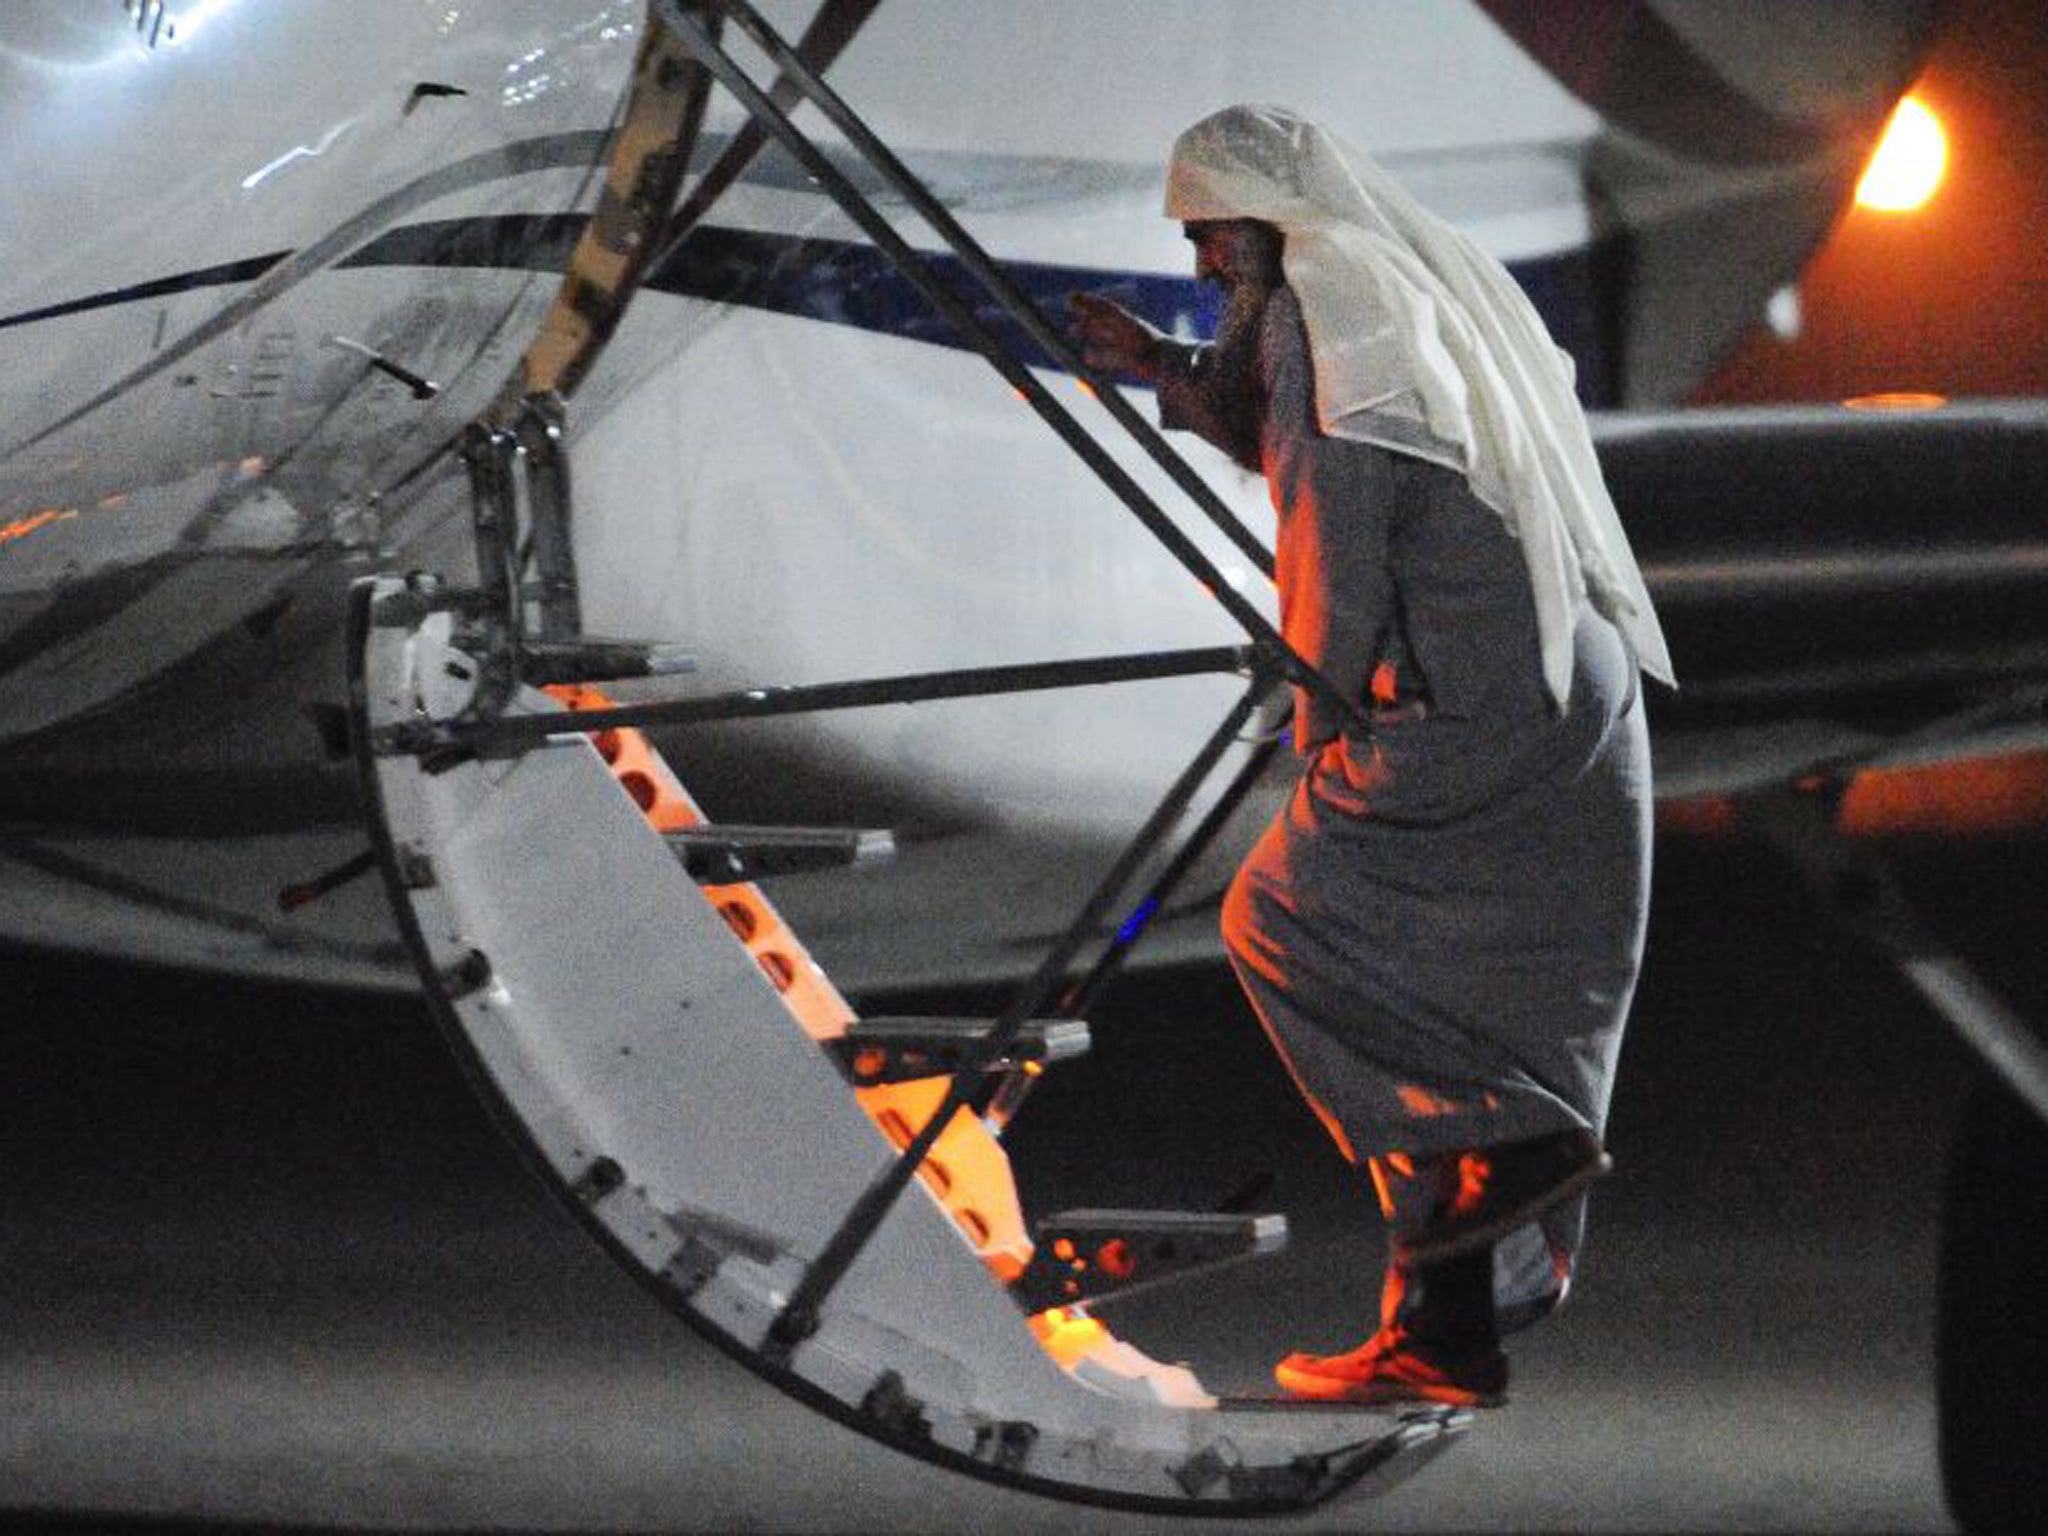 A photograph issued by the Ministry of Defence of Abu Qatada at RAF Northolt in West London boarding a private flight bound for Jordan